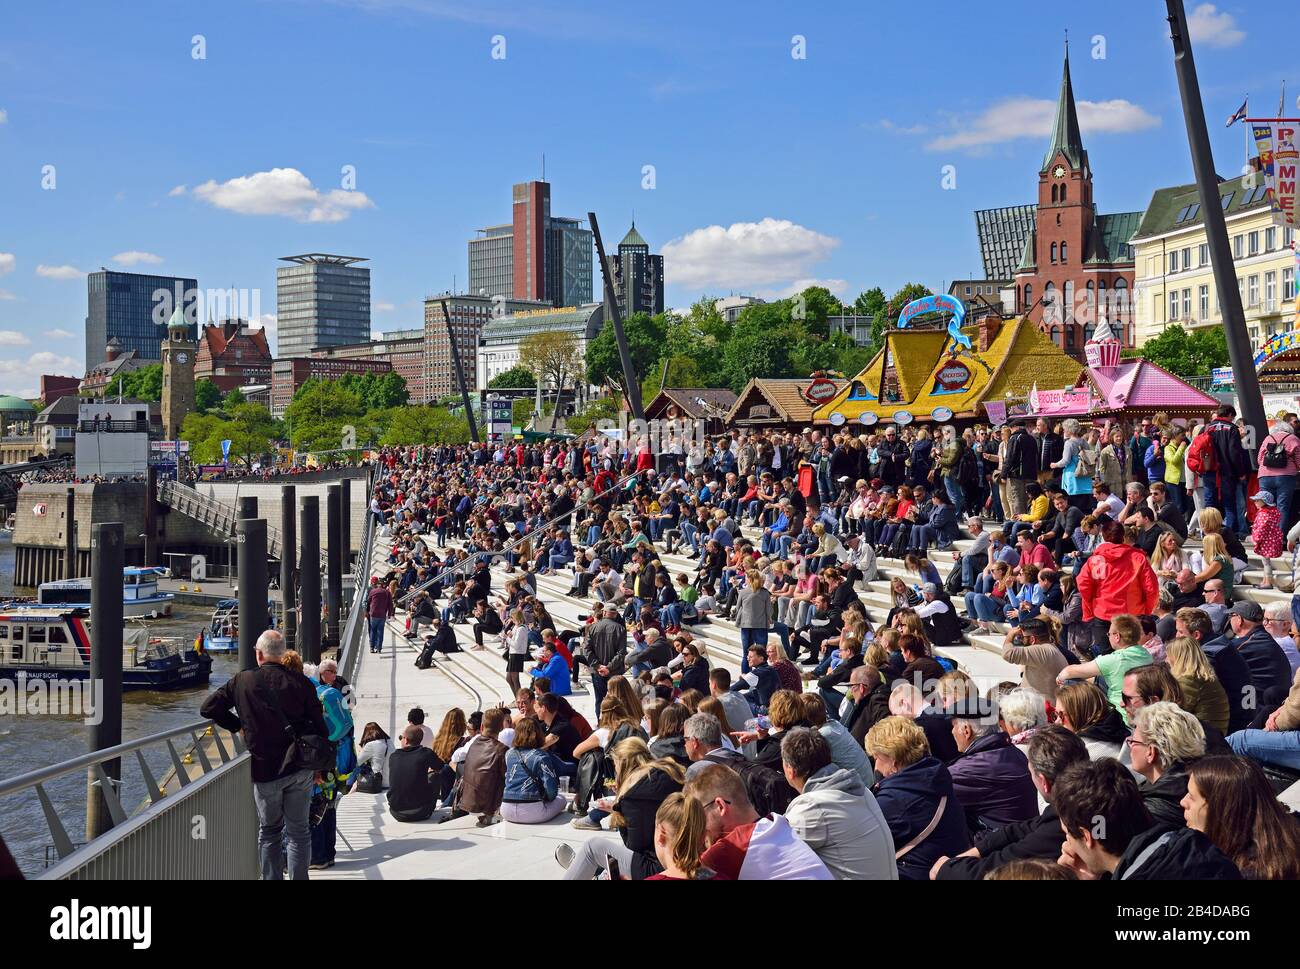 Europe, Germany, Hanseatic city of Hamburg, harbor, Baumwall, flood protection system, flood protection wall with integrated promenade, visitors to the port birthday, Stock Photo